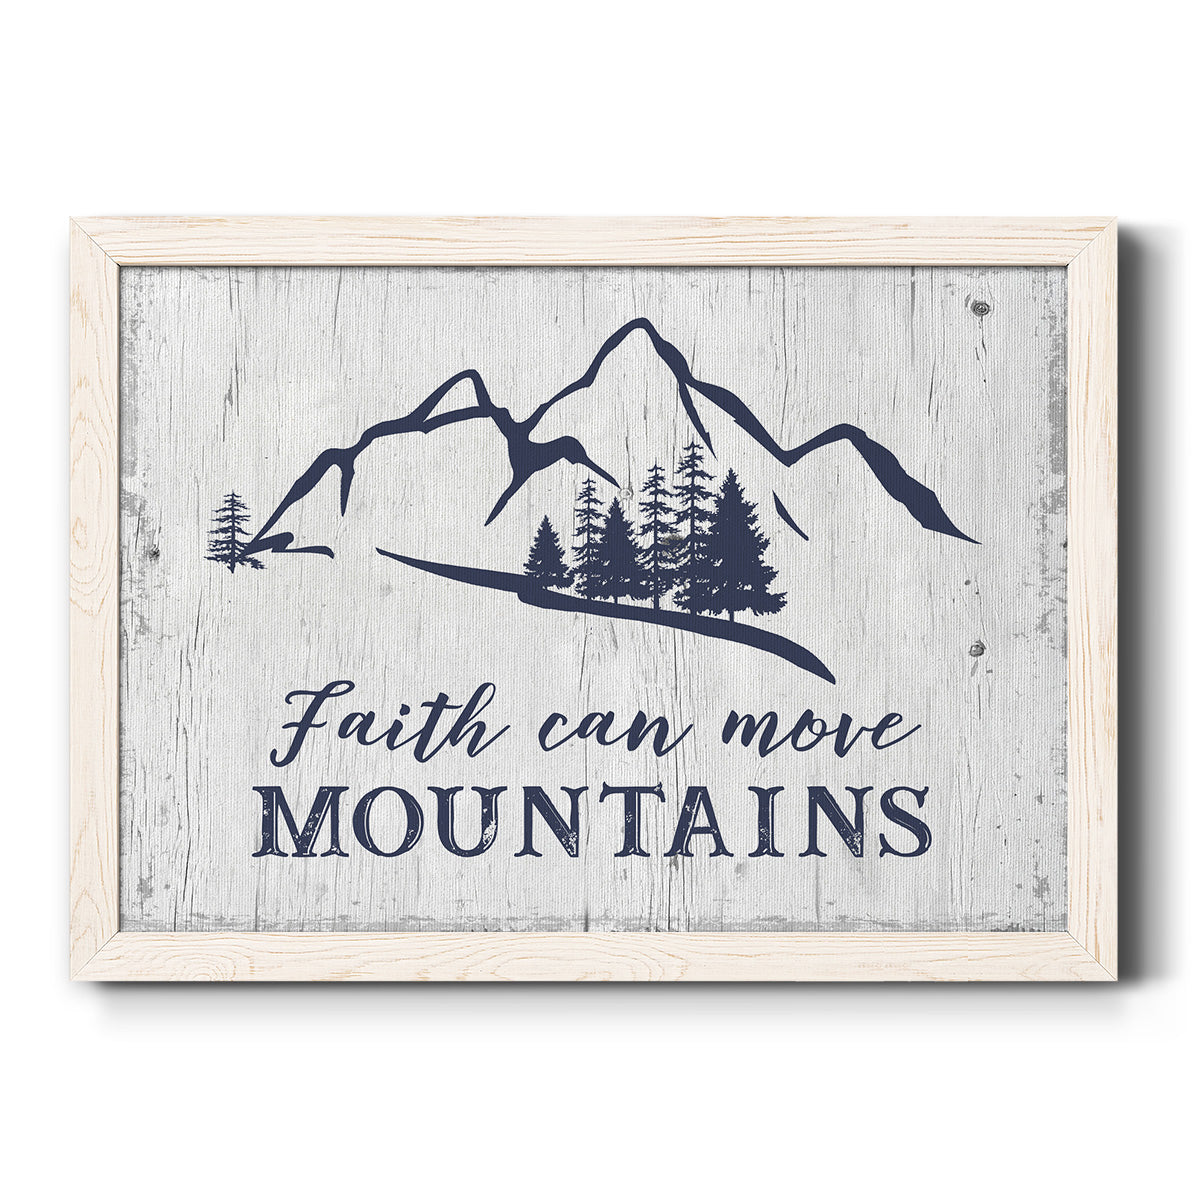 Move Mountains-Premium Framed Canvas - Ready to Hang